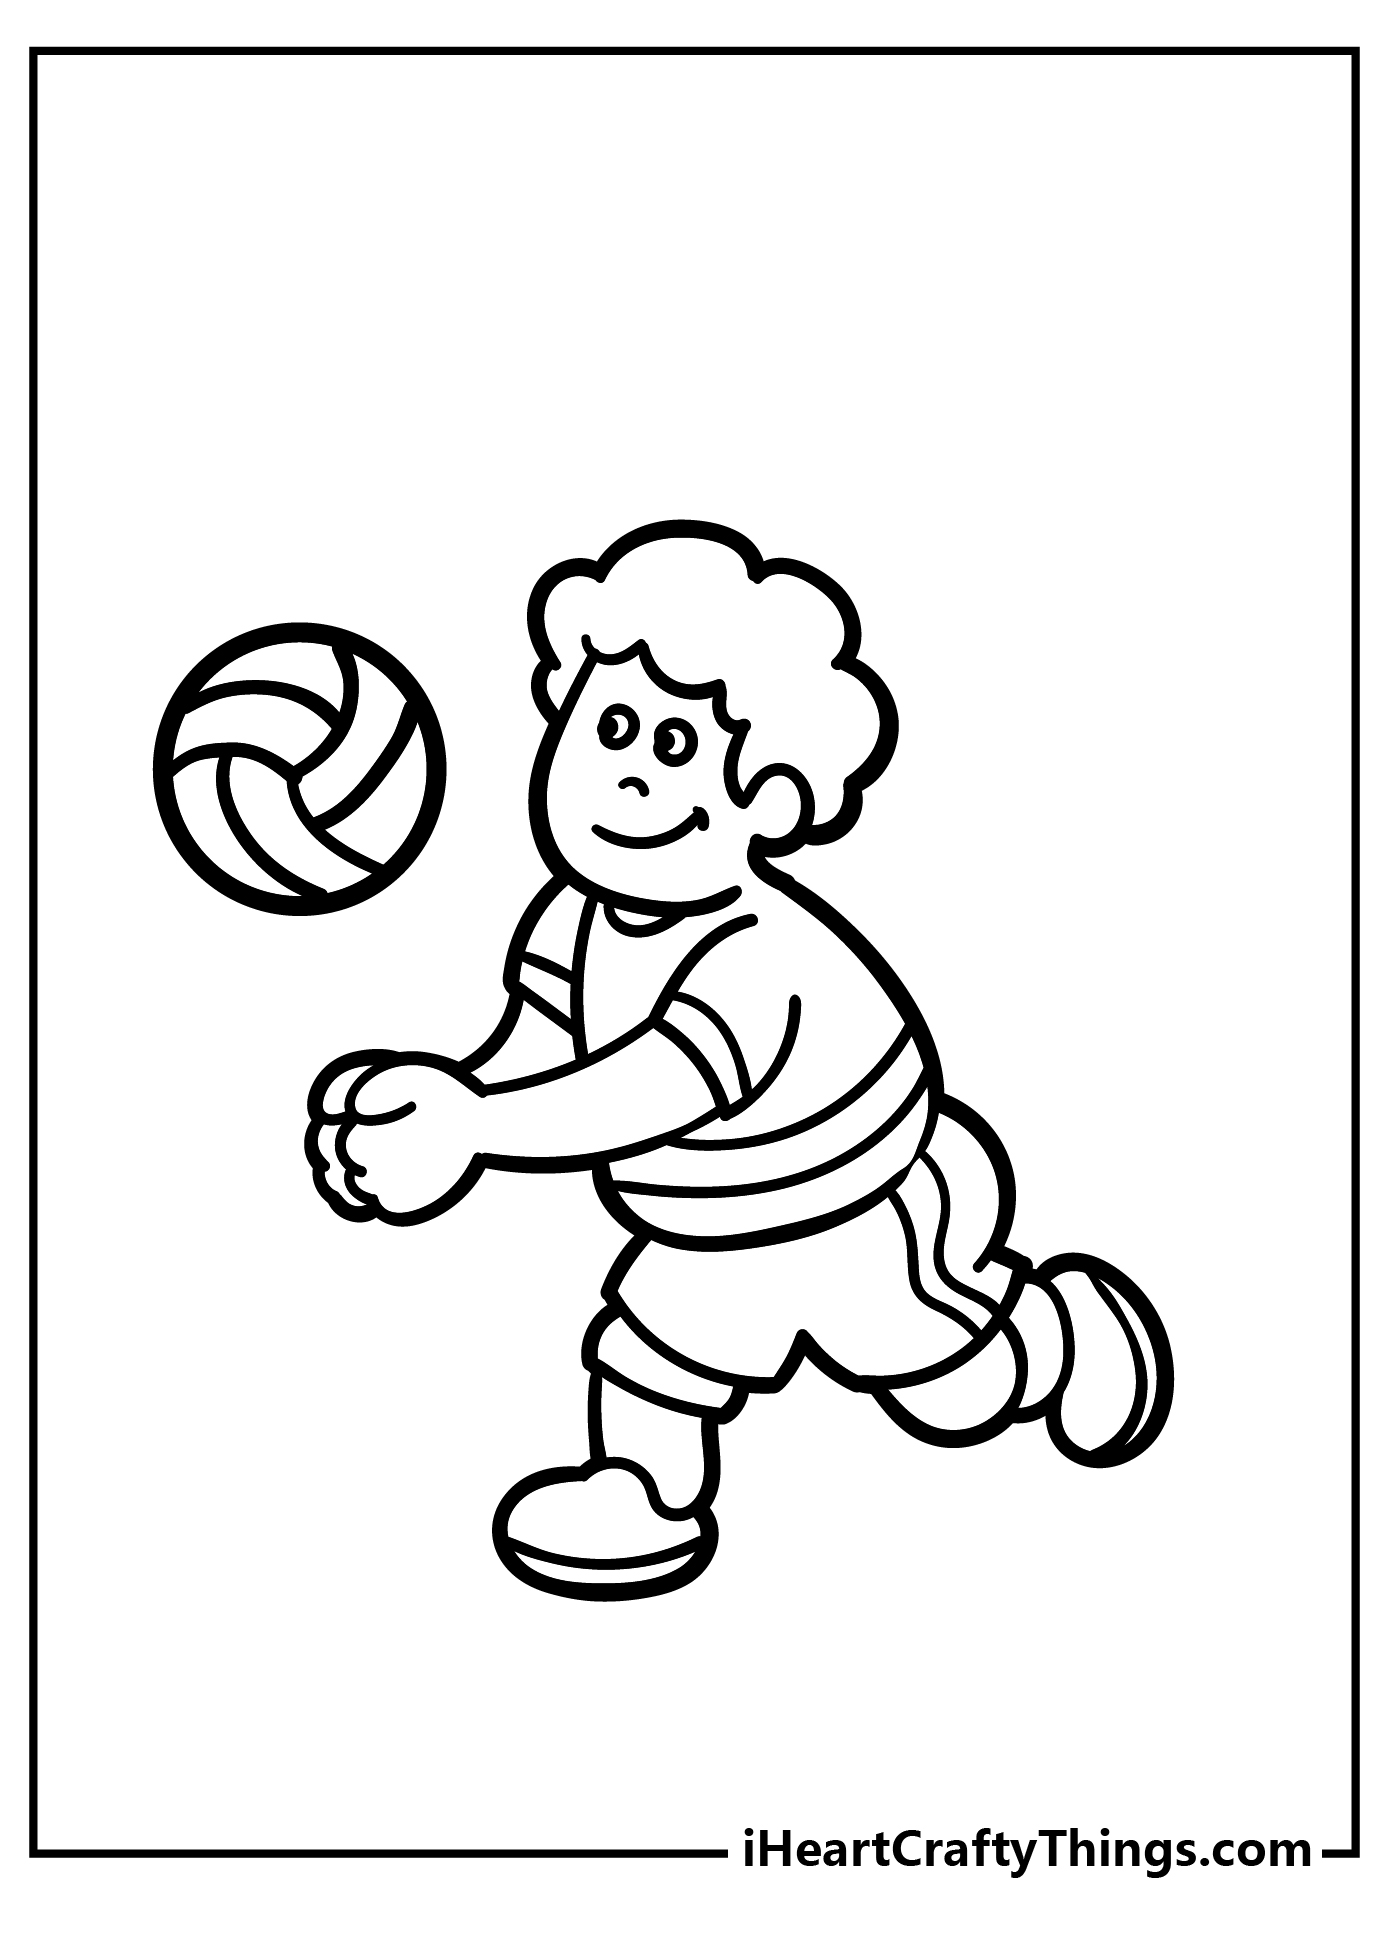 Volleyball Coloring Book for adults free download